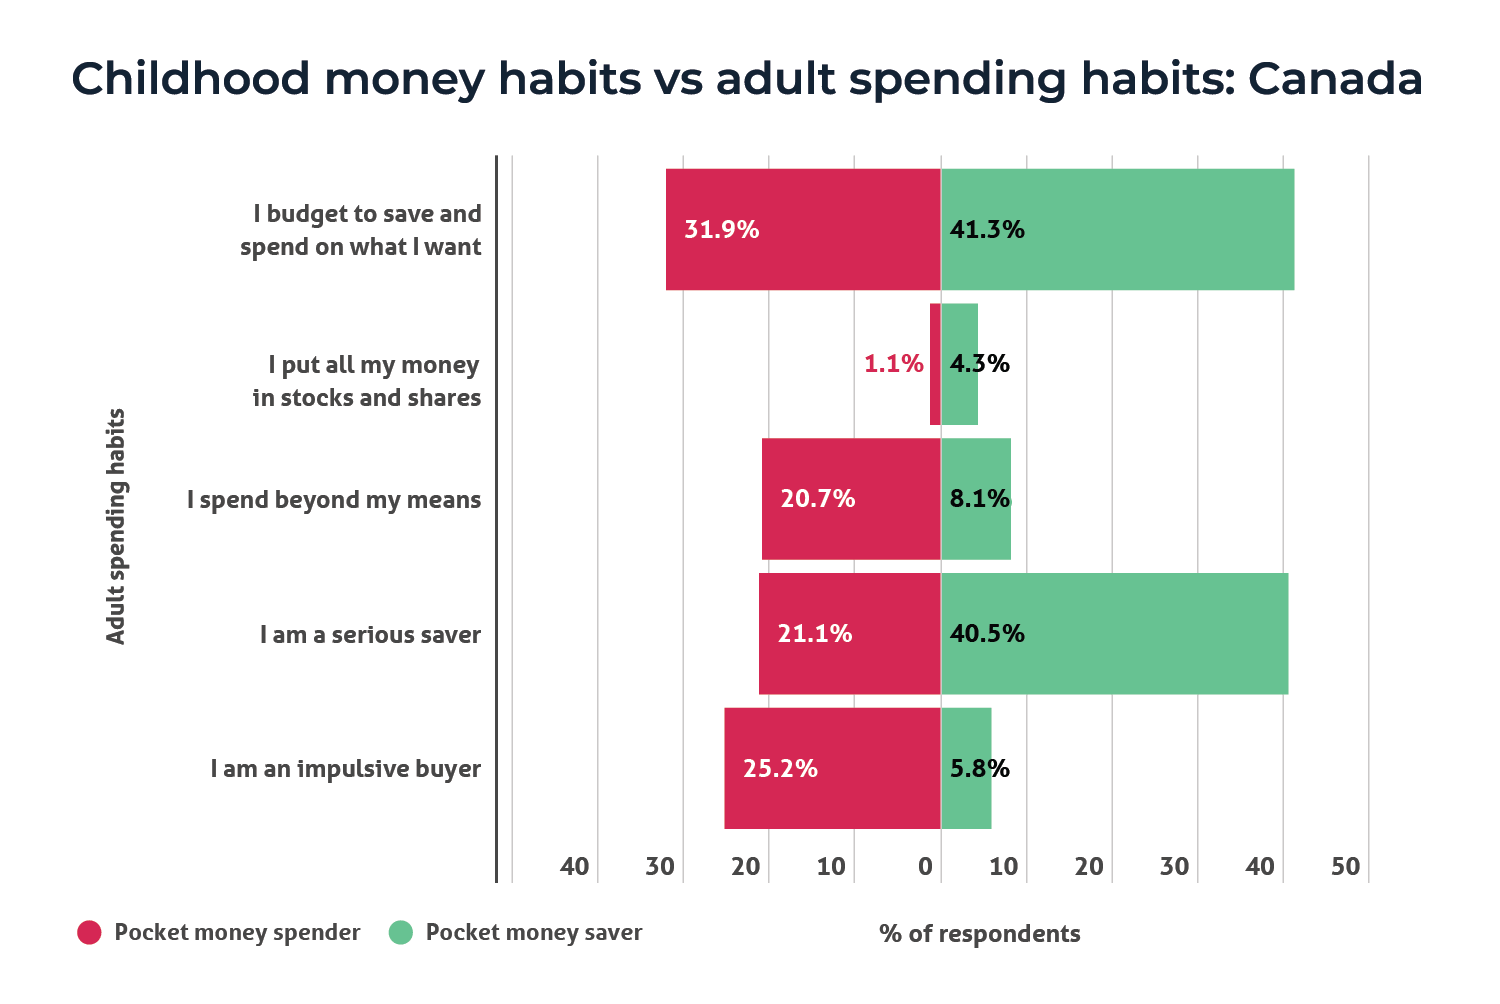 A bar chart showing the difference in Canadian spending habits between those who saved pocket money and those who spent it